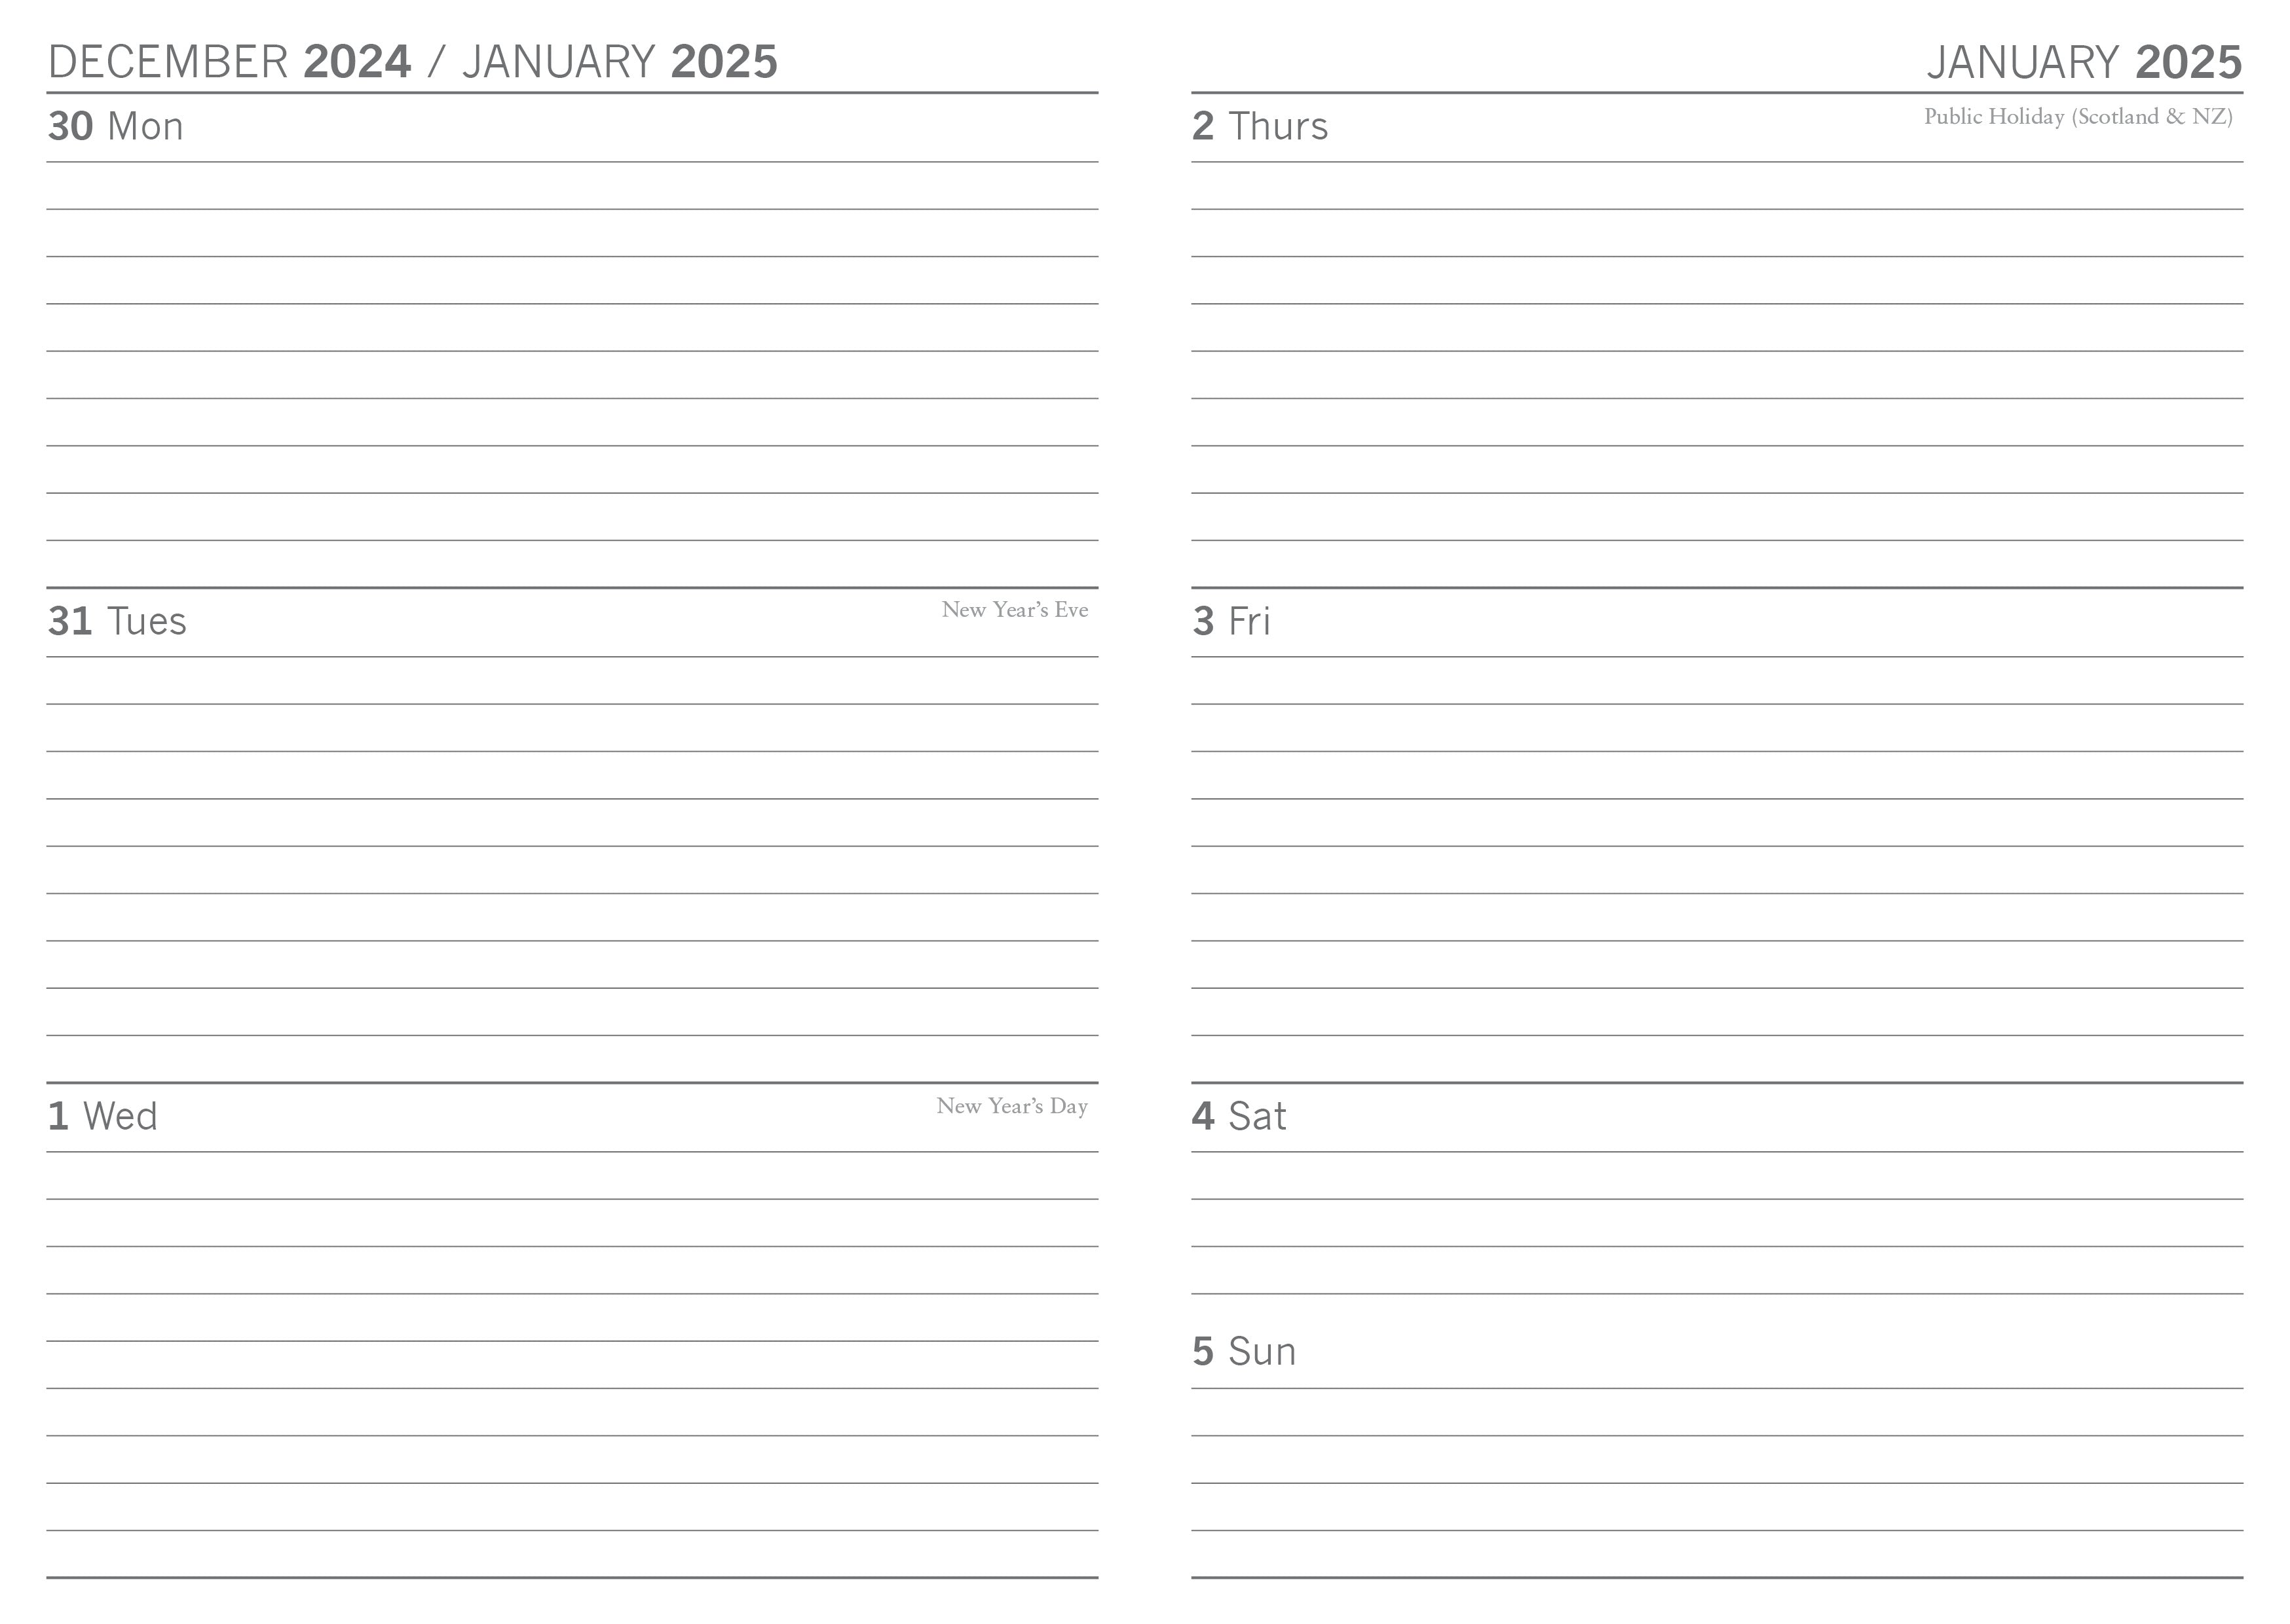 2025 Anemones - Weekly Diary/Planner